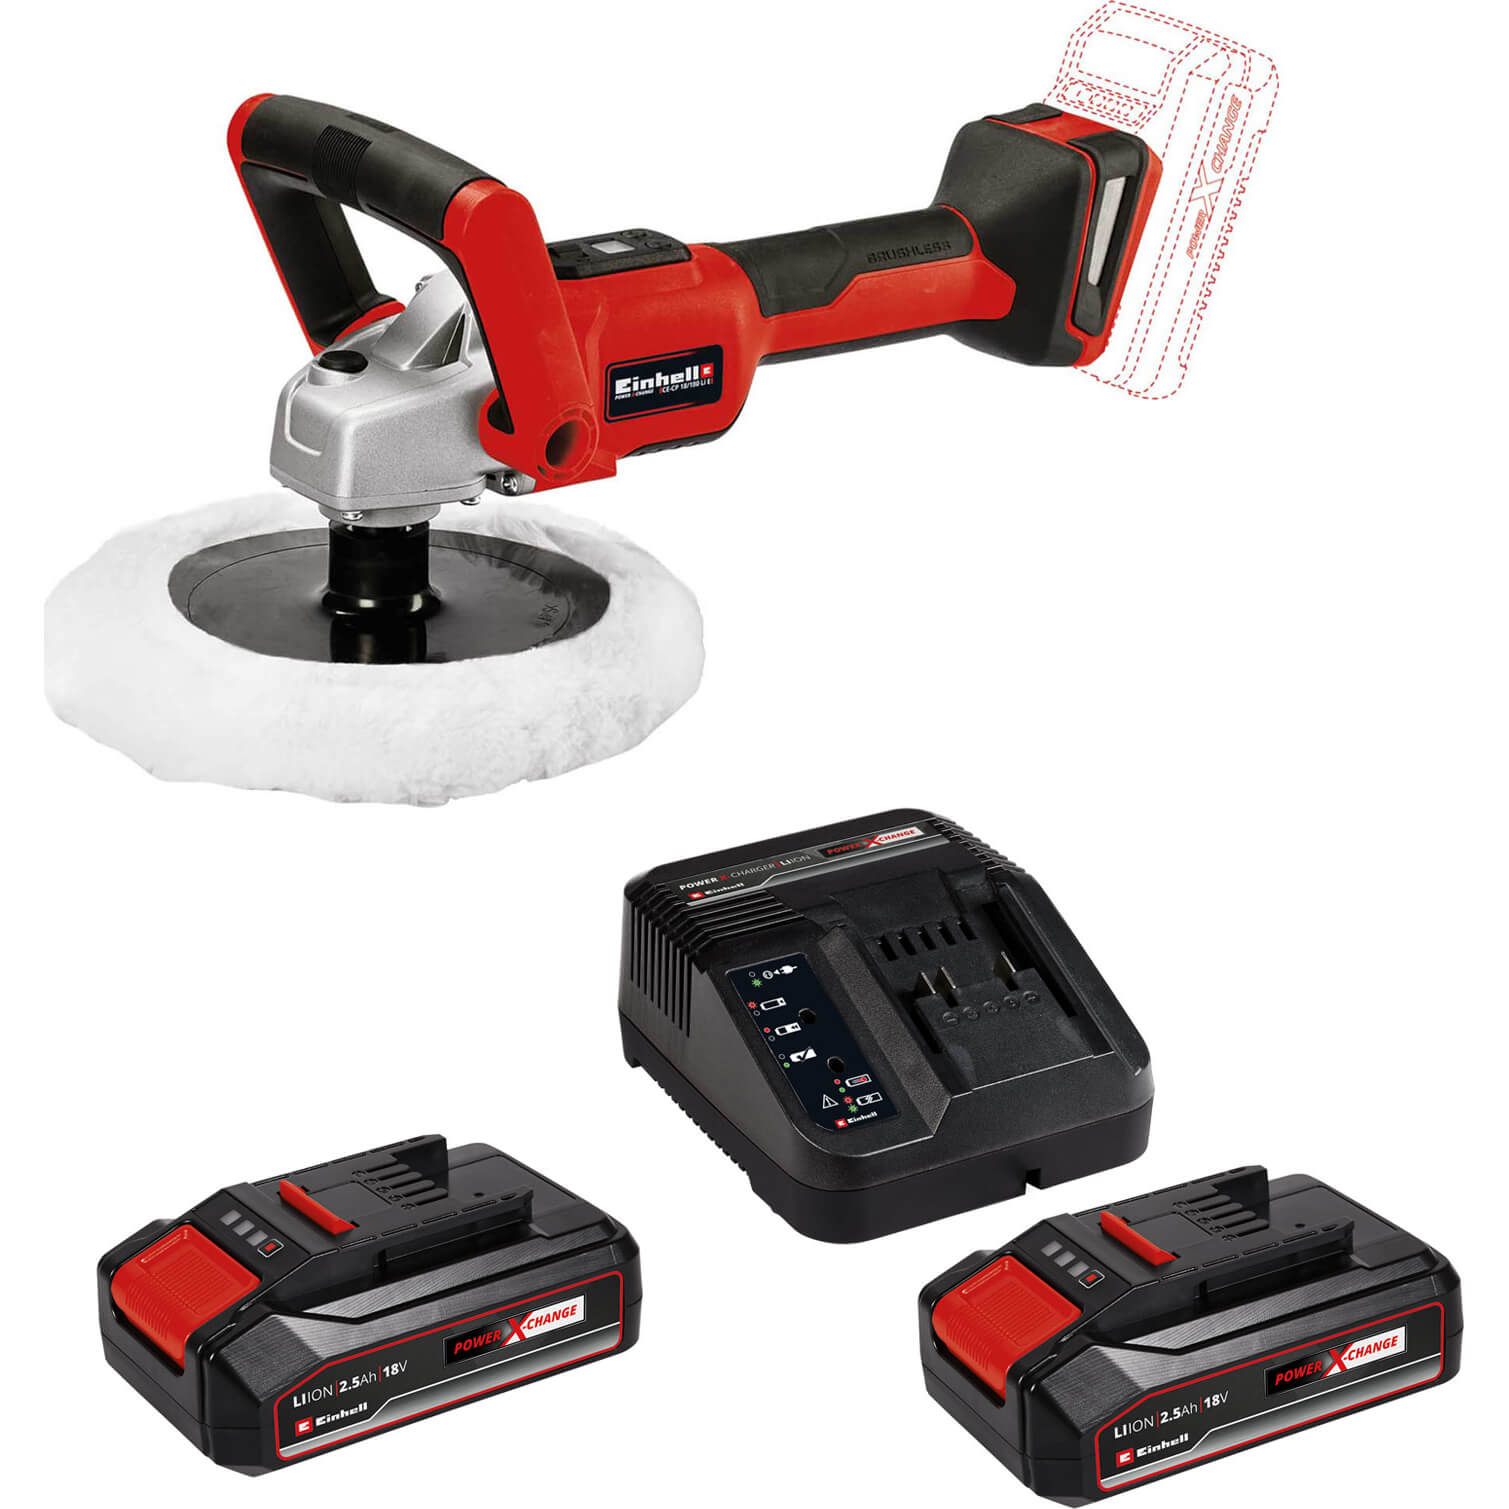 Image of Einhell CE-CP 18/180 Li 18v Cordless Polisher and Sander 180mm 2 x 2.5ah Li-ion Charger No Case